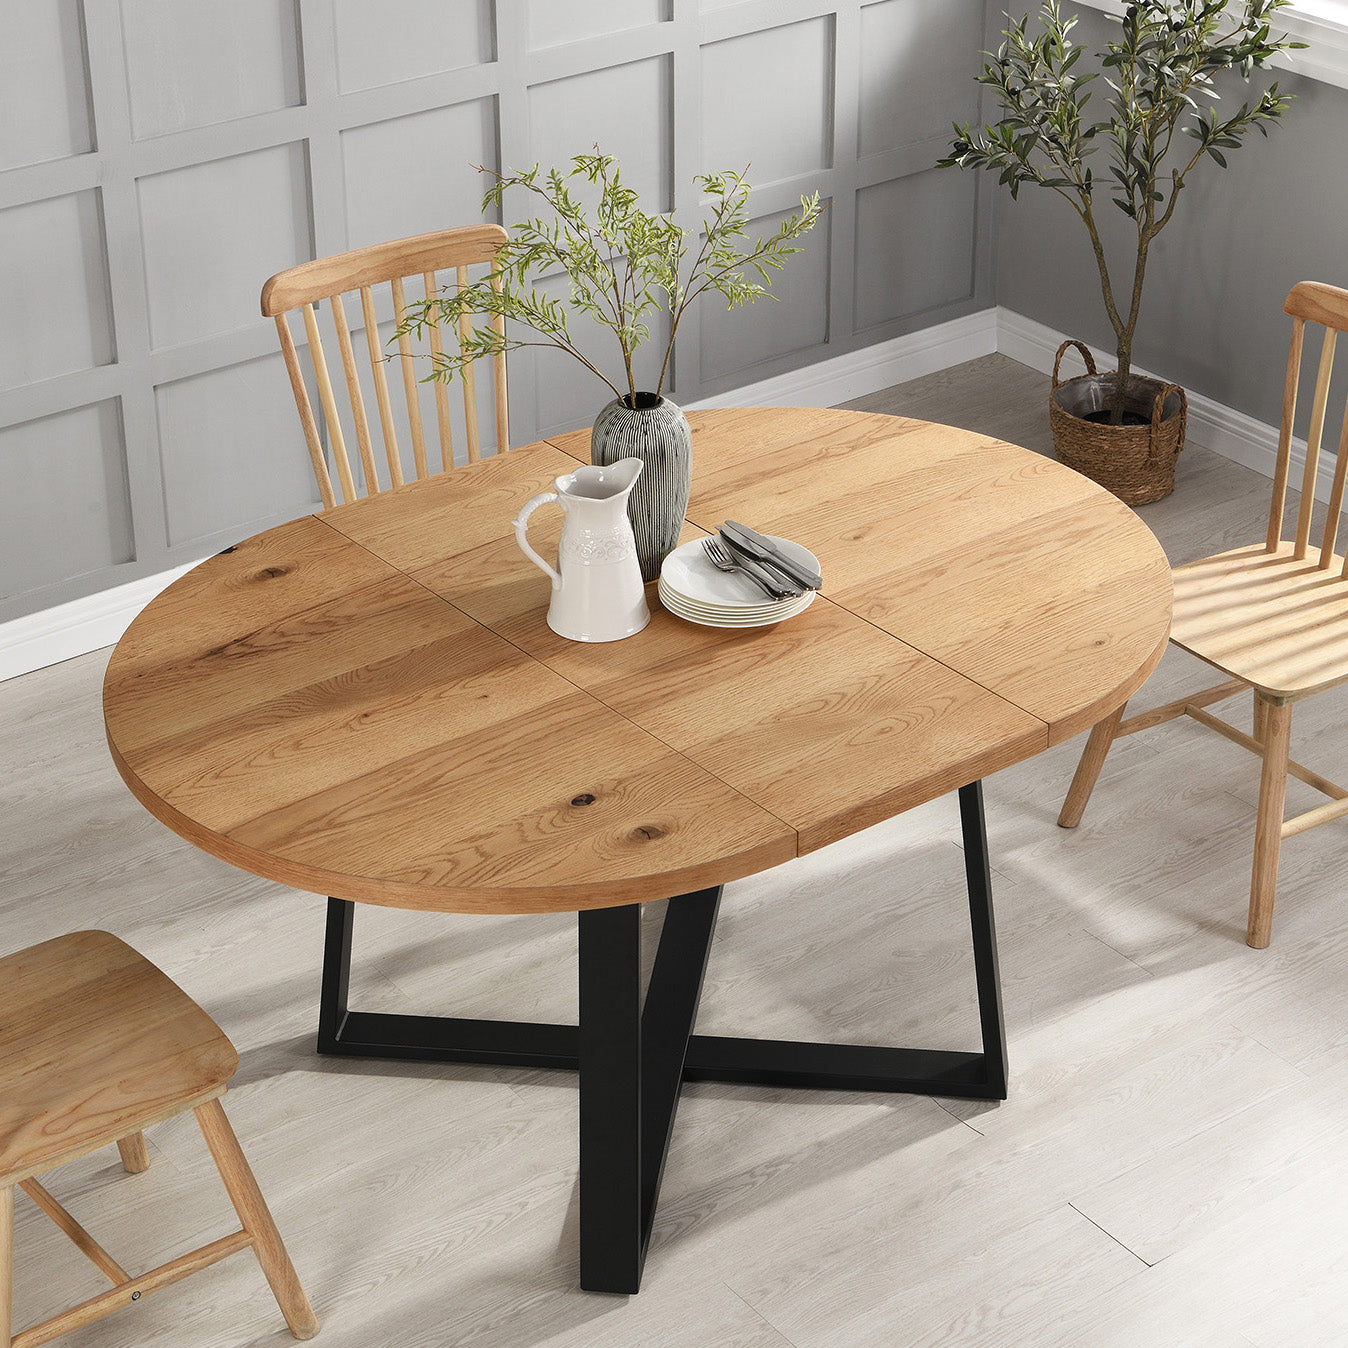 BERN Extending Round Dining Table with Metal Legs, Oak